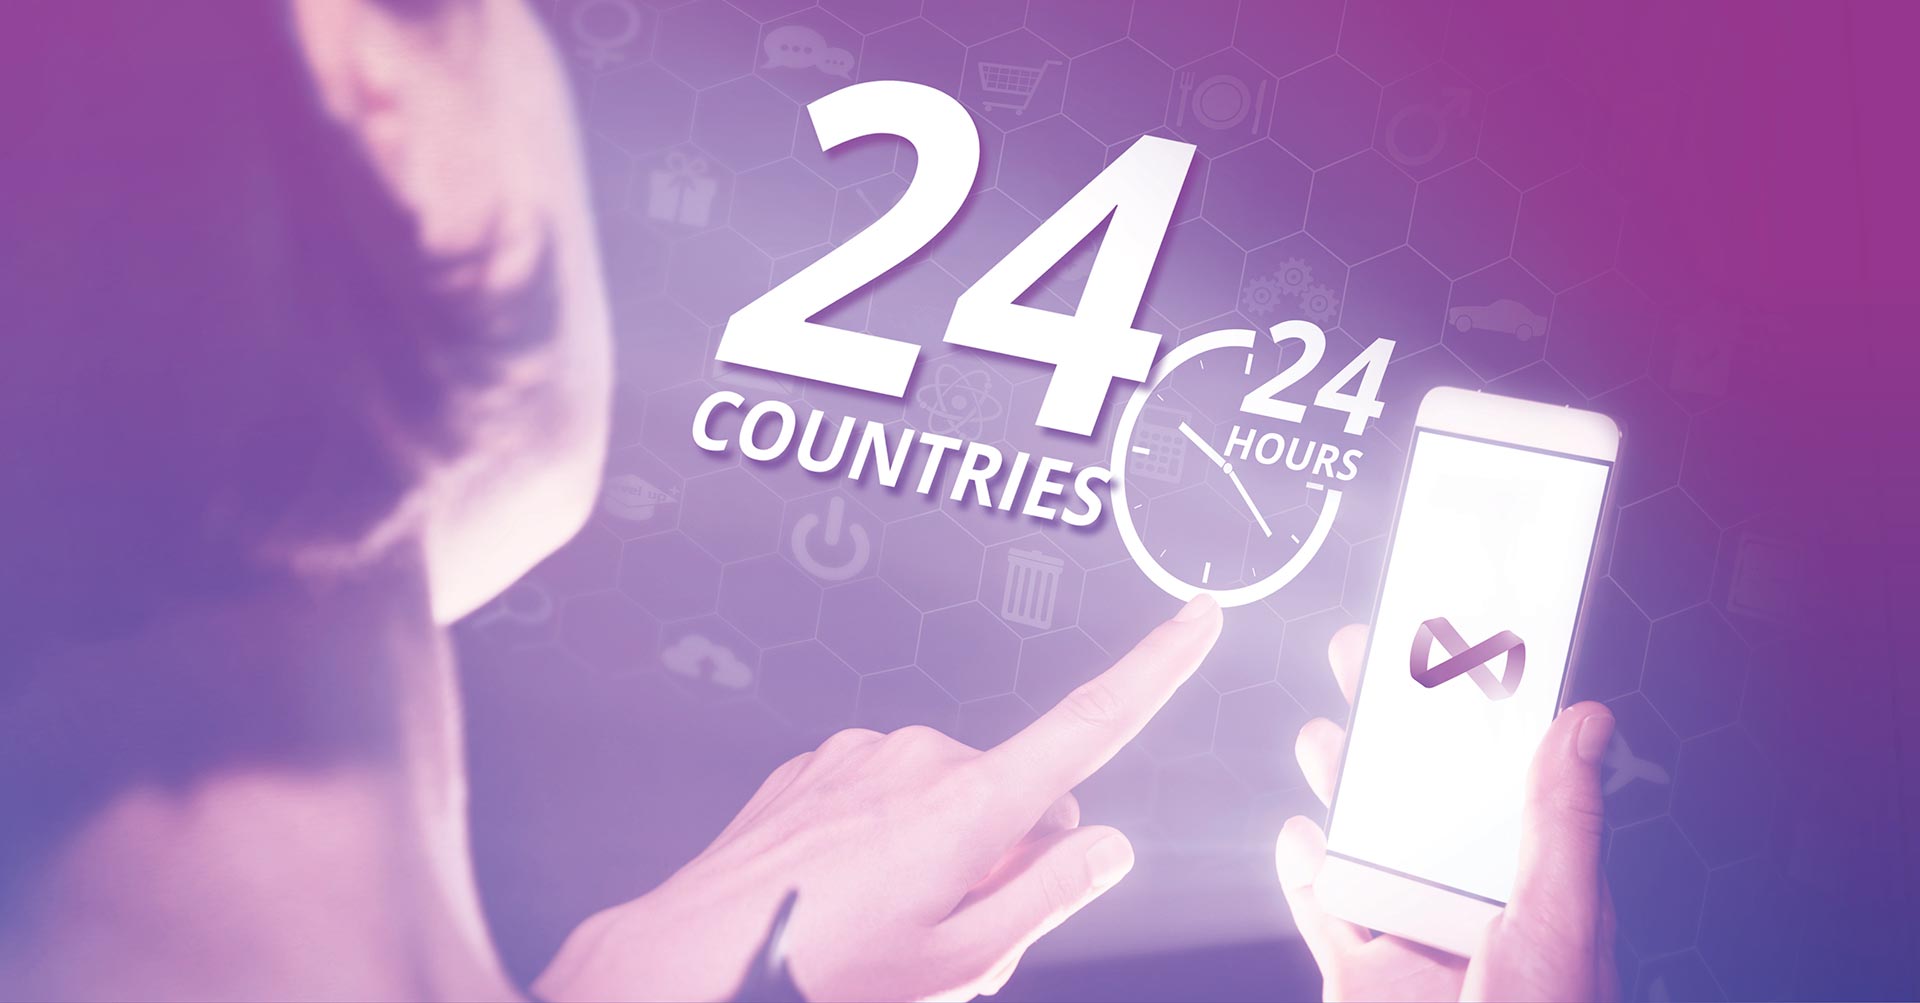 Epsilon’s SIP Trunking Hits 24/24 Milestone – 24-hour provisioning in 24 Countries